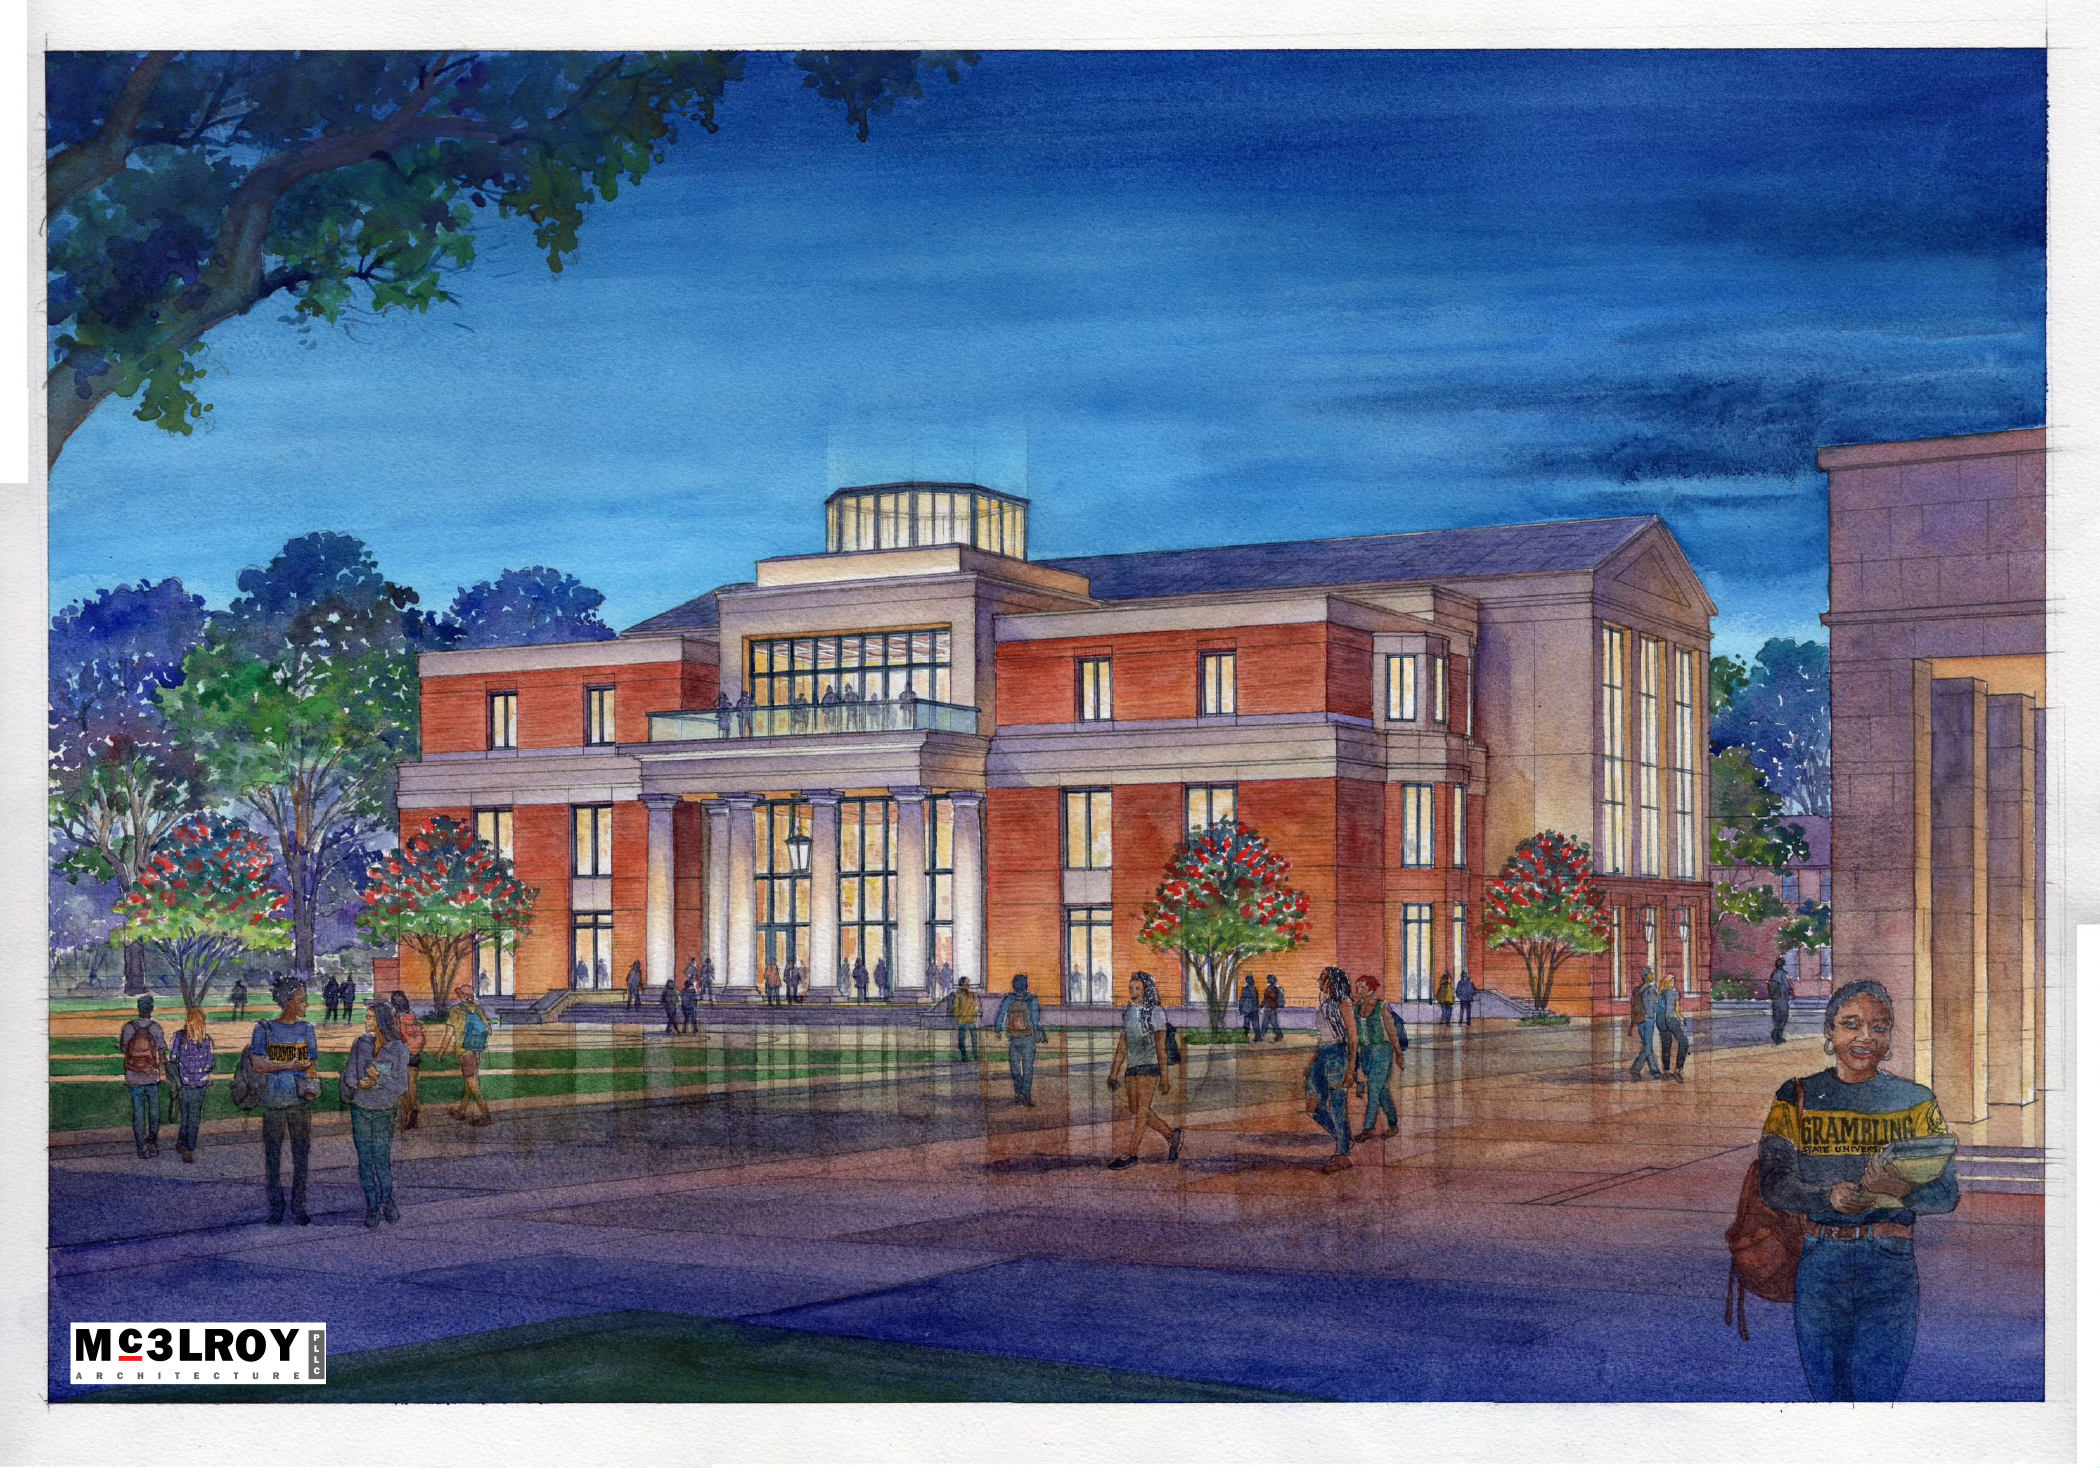 Tell Them We Are Building: Grambling State breaks ground to build on future with Student Services Center